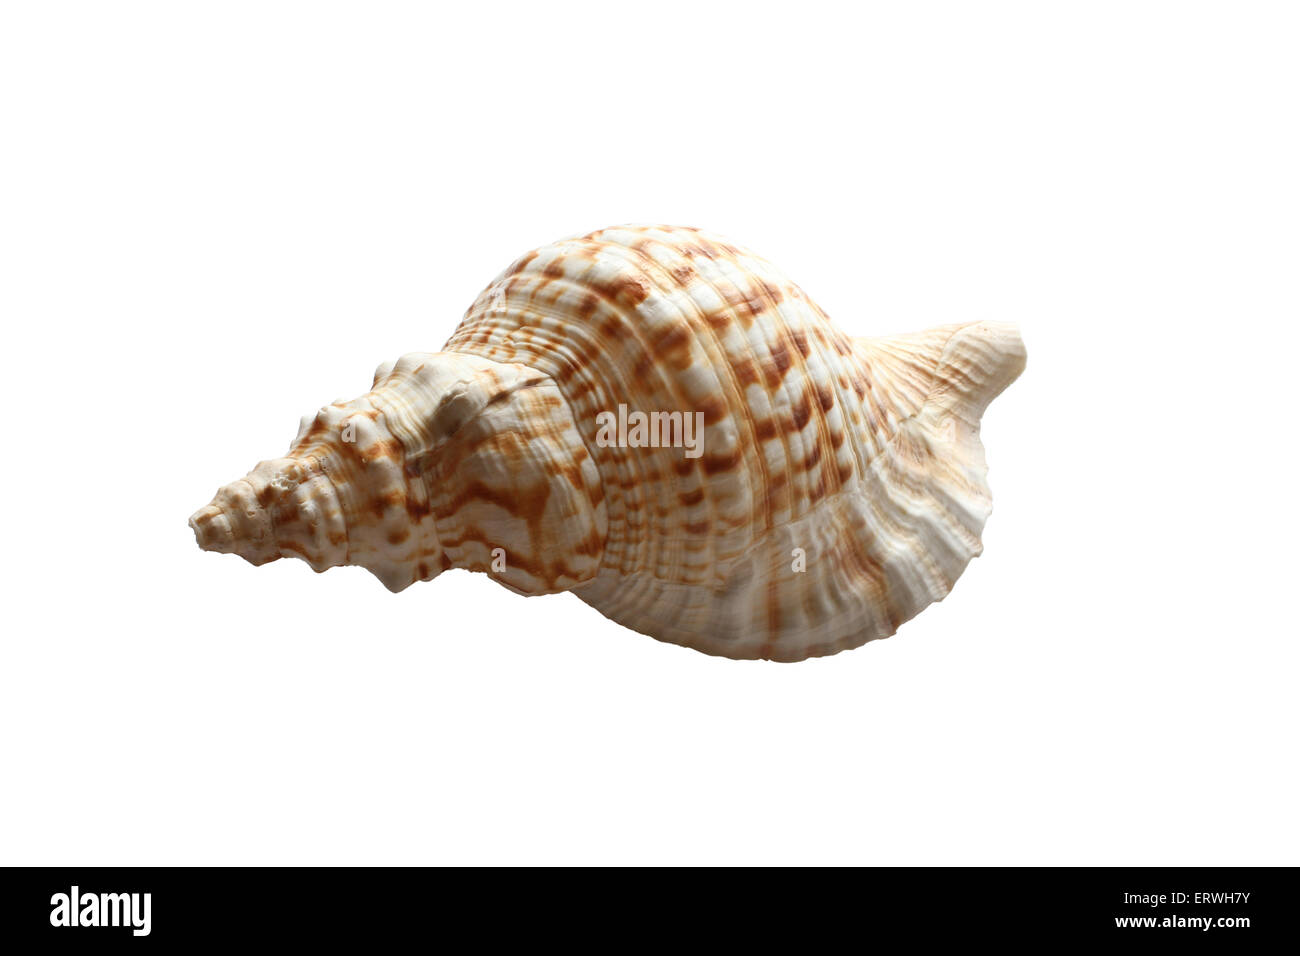 Big sea shell isolated on white Banque D'Images